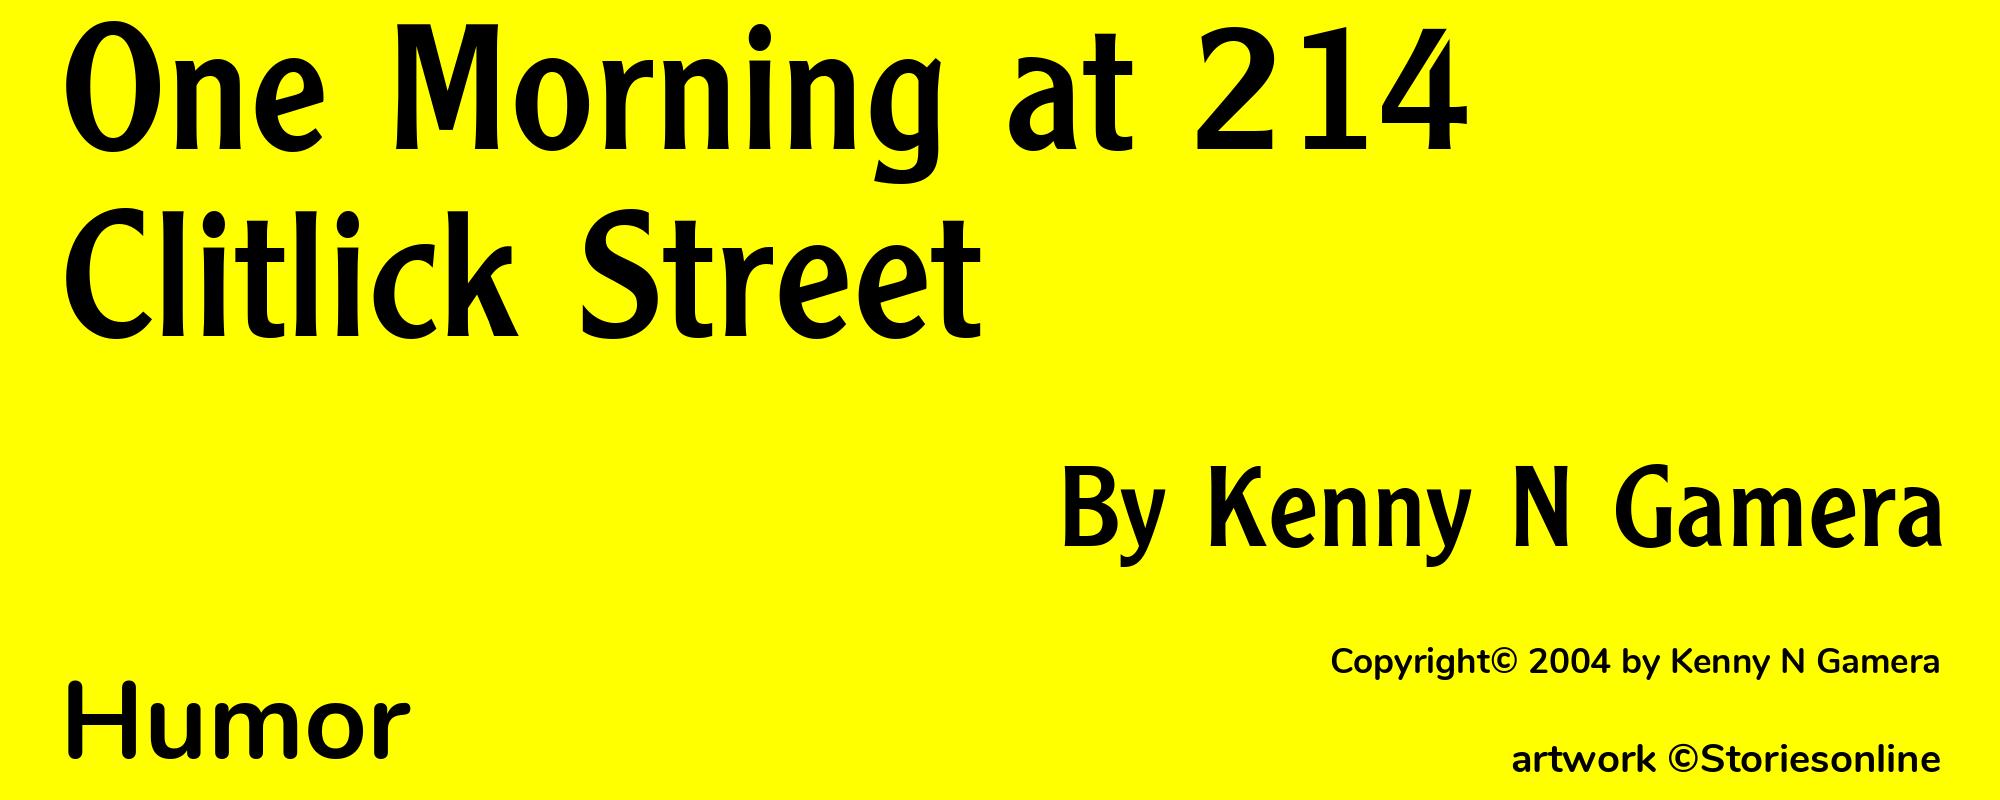 One Morning at 214 Clitlick Street - Cover